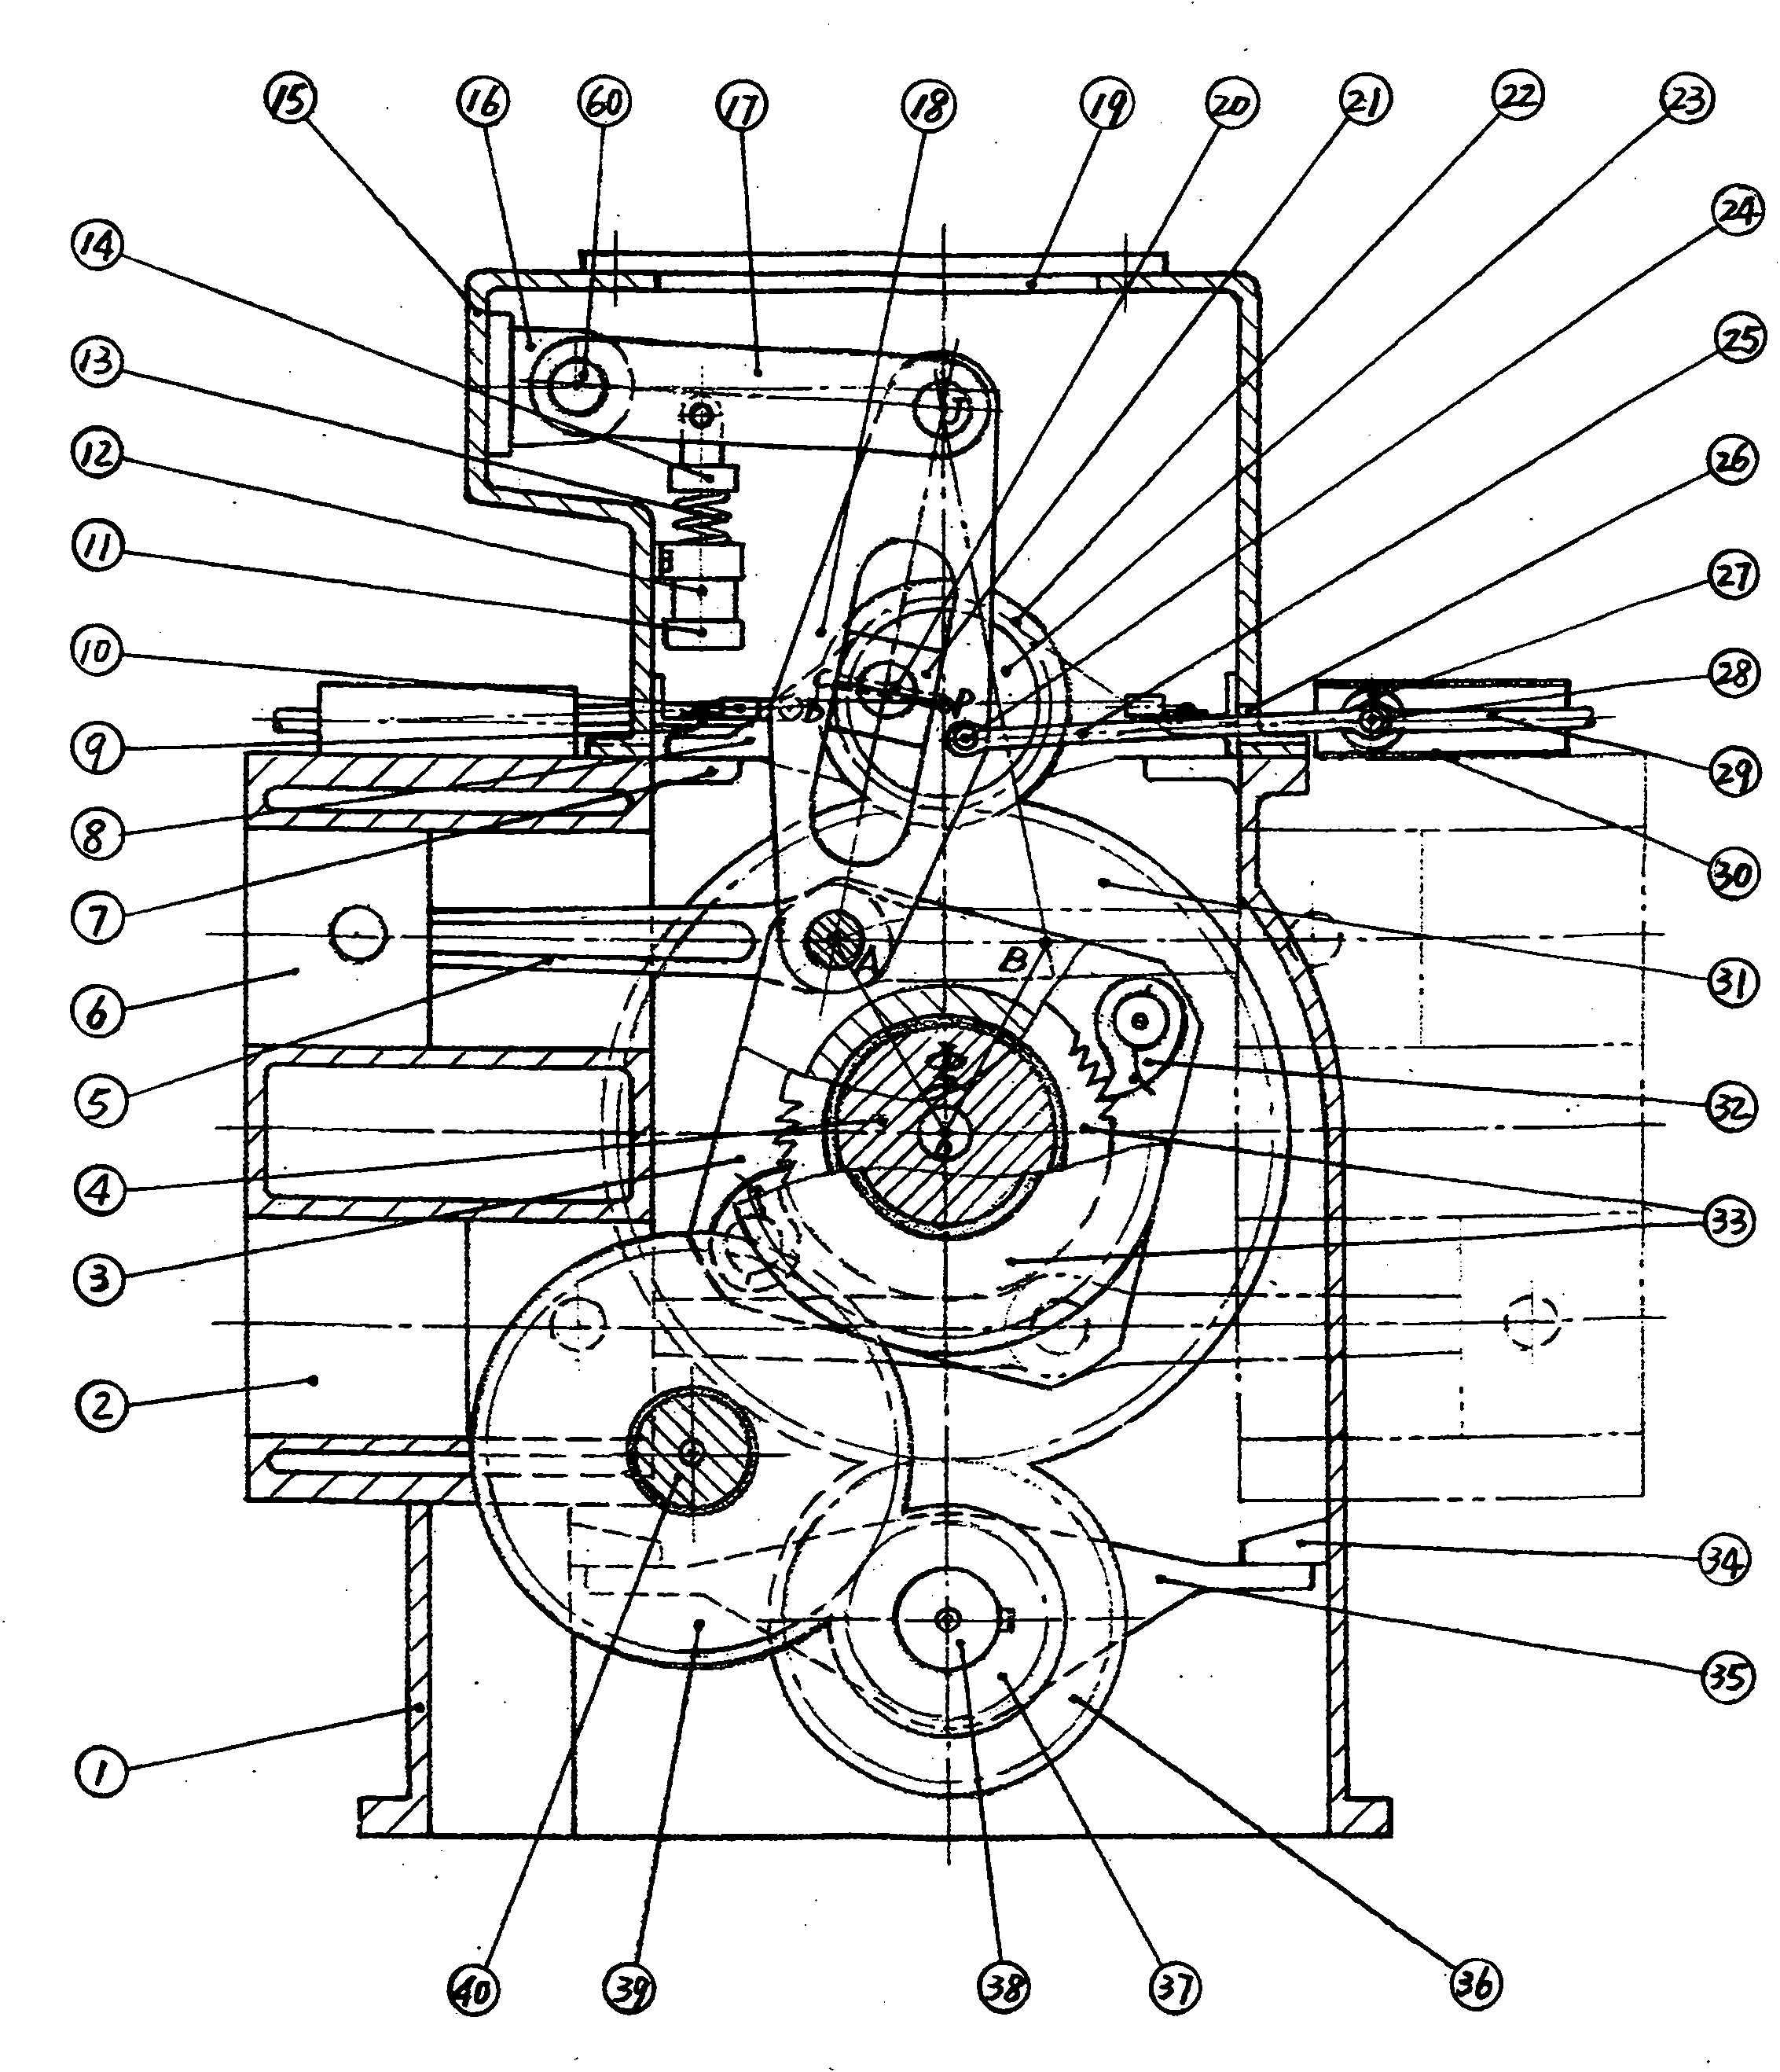 Improvement of driving mechanism of crankless engine